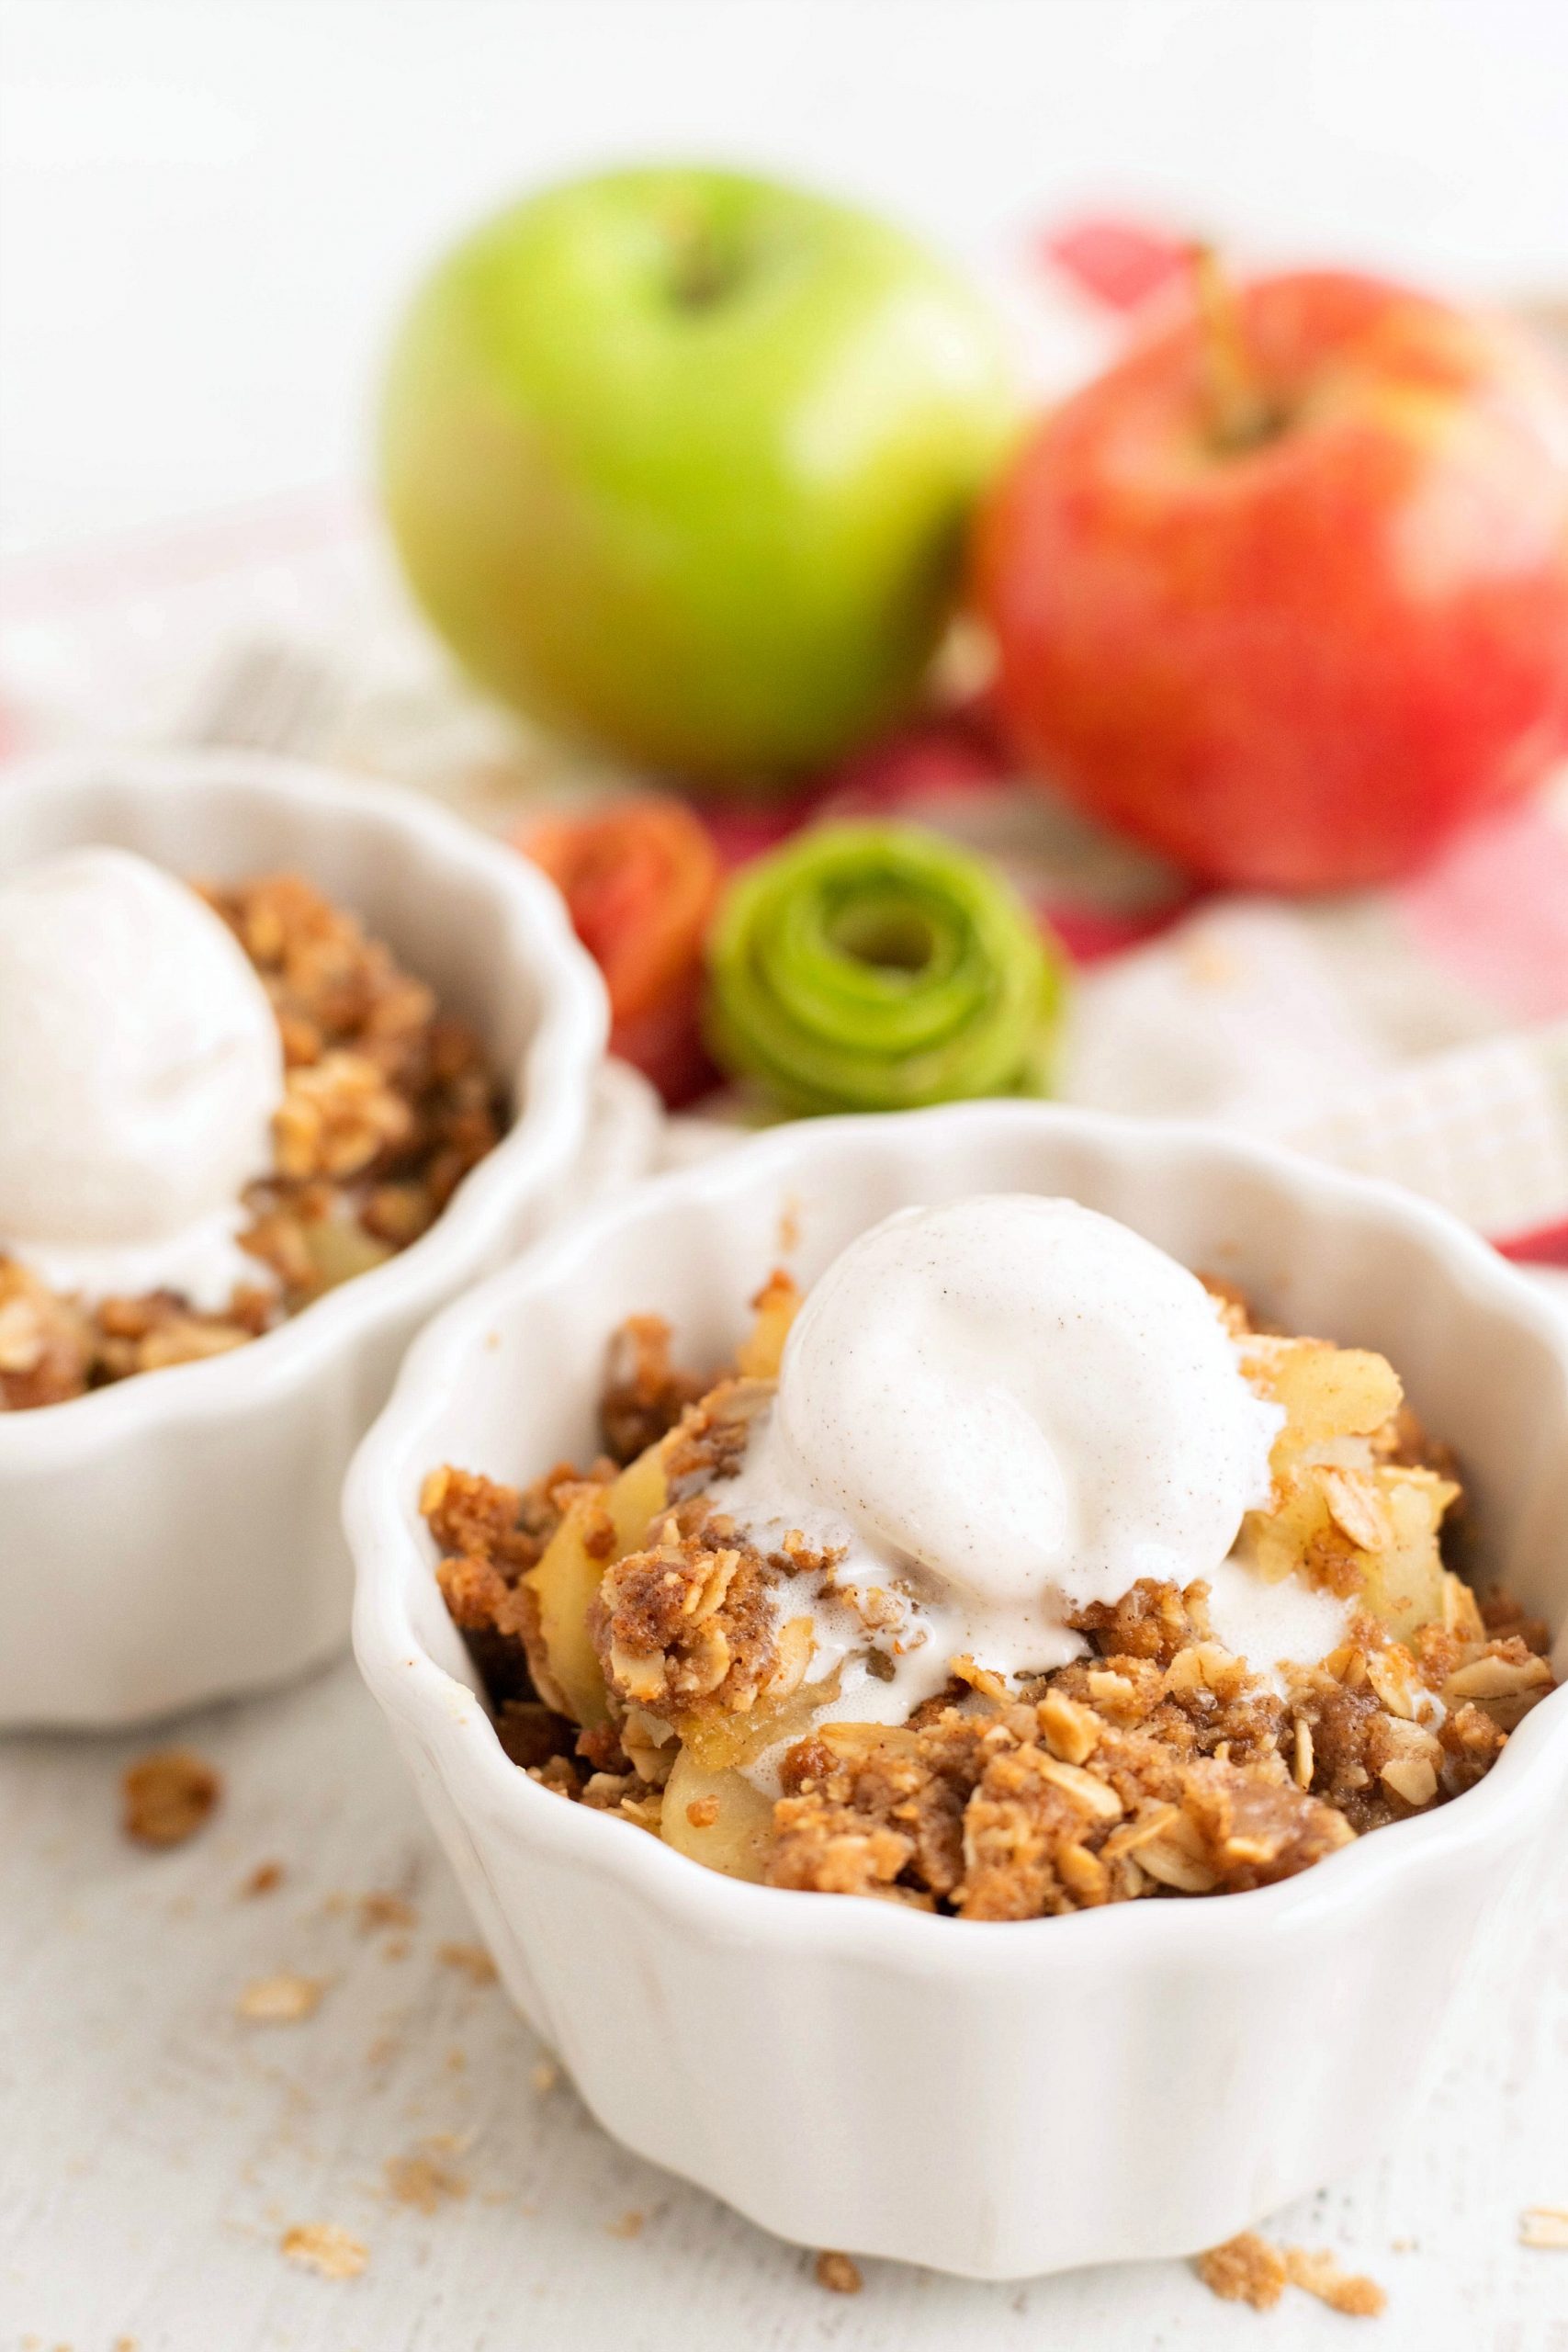 Two desserts cups with apple crisp topped with a scoop of ice cream.